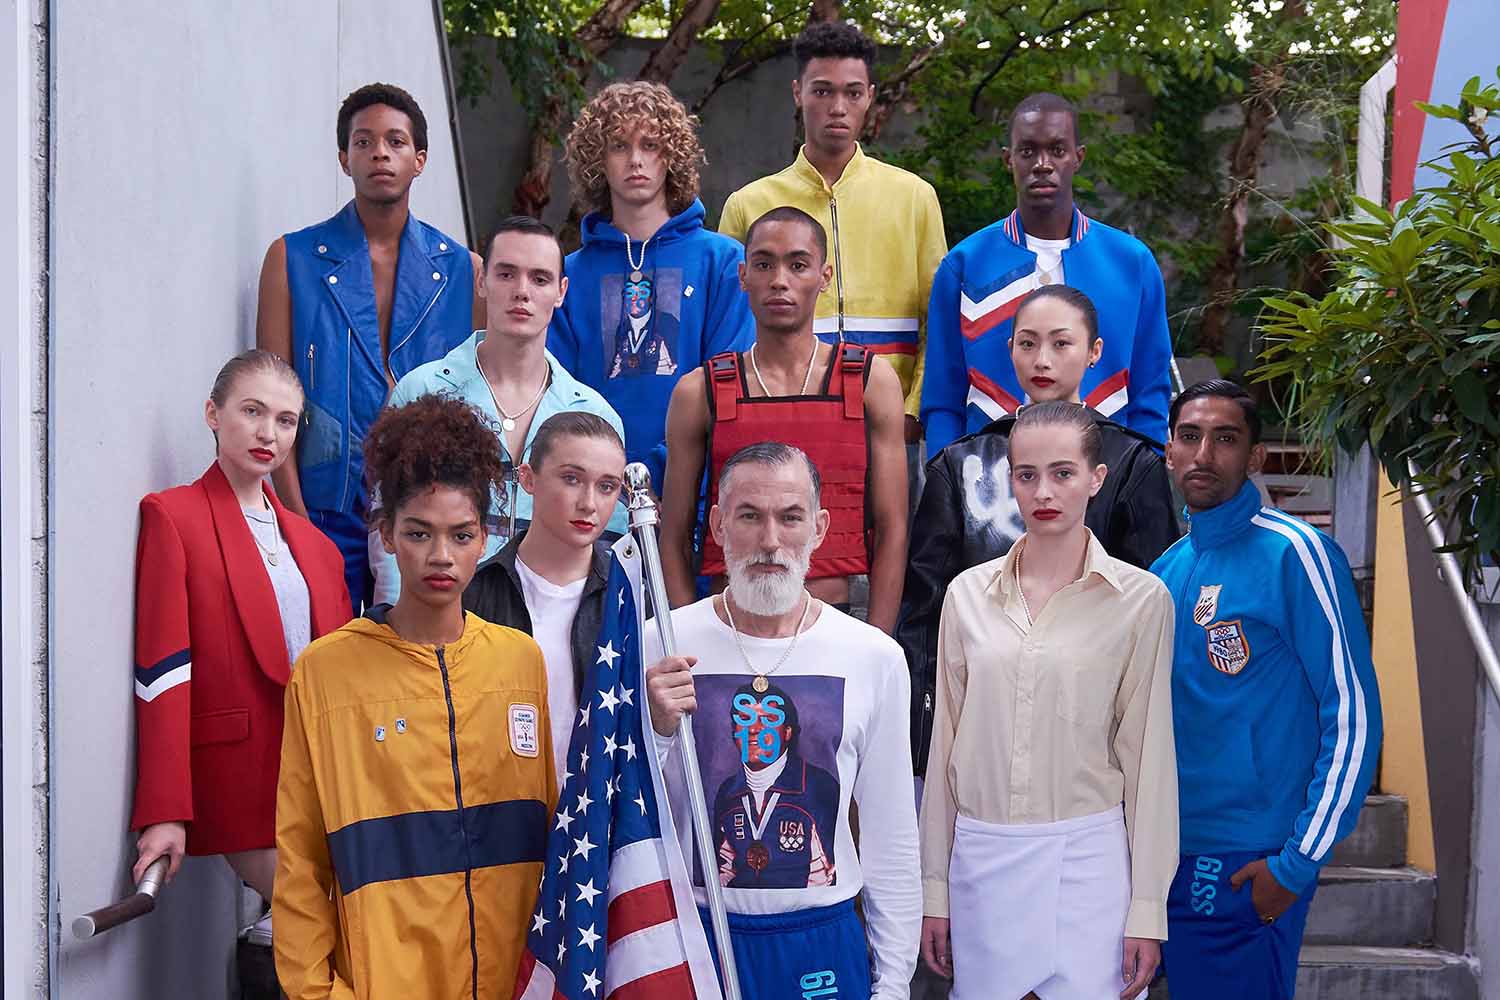 Christopher Lowman Spring 2019: The Glorious Olympics